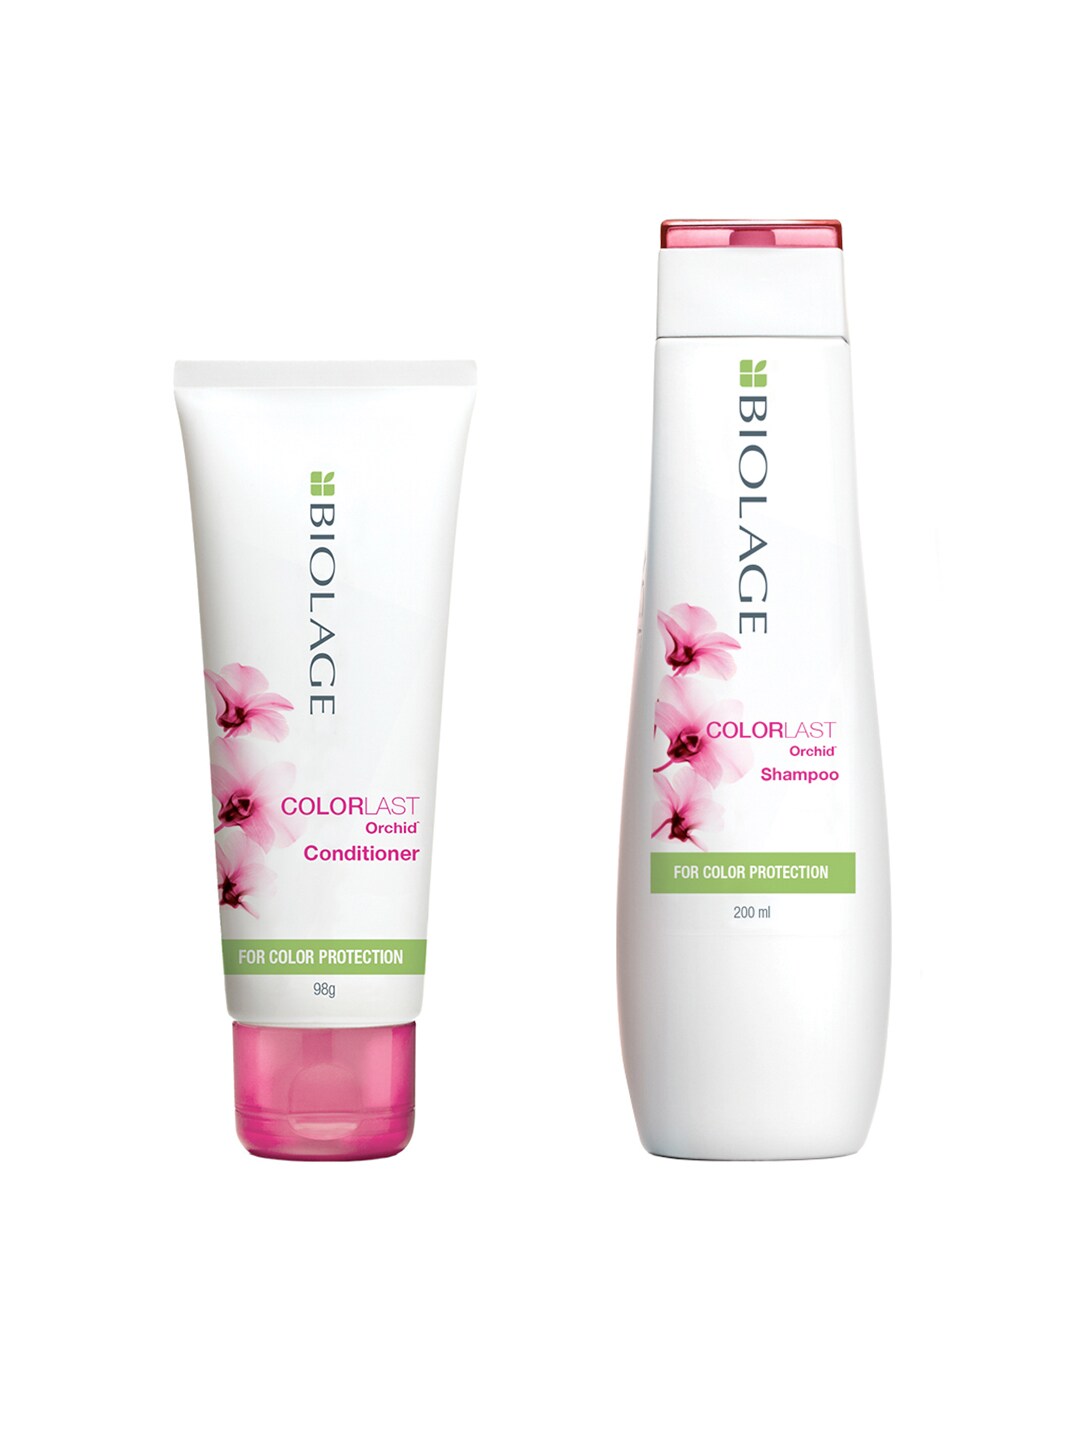 Biolage Set of Color Last Orchid Shampoo 200 ml & Conditioner 98 g Price in India